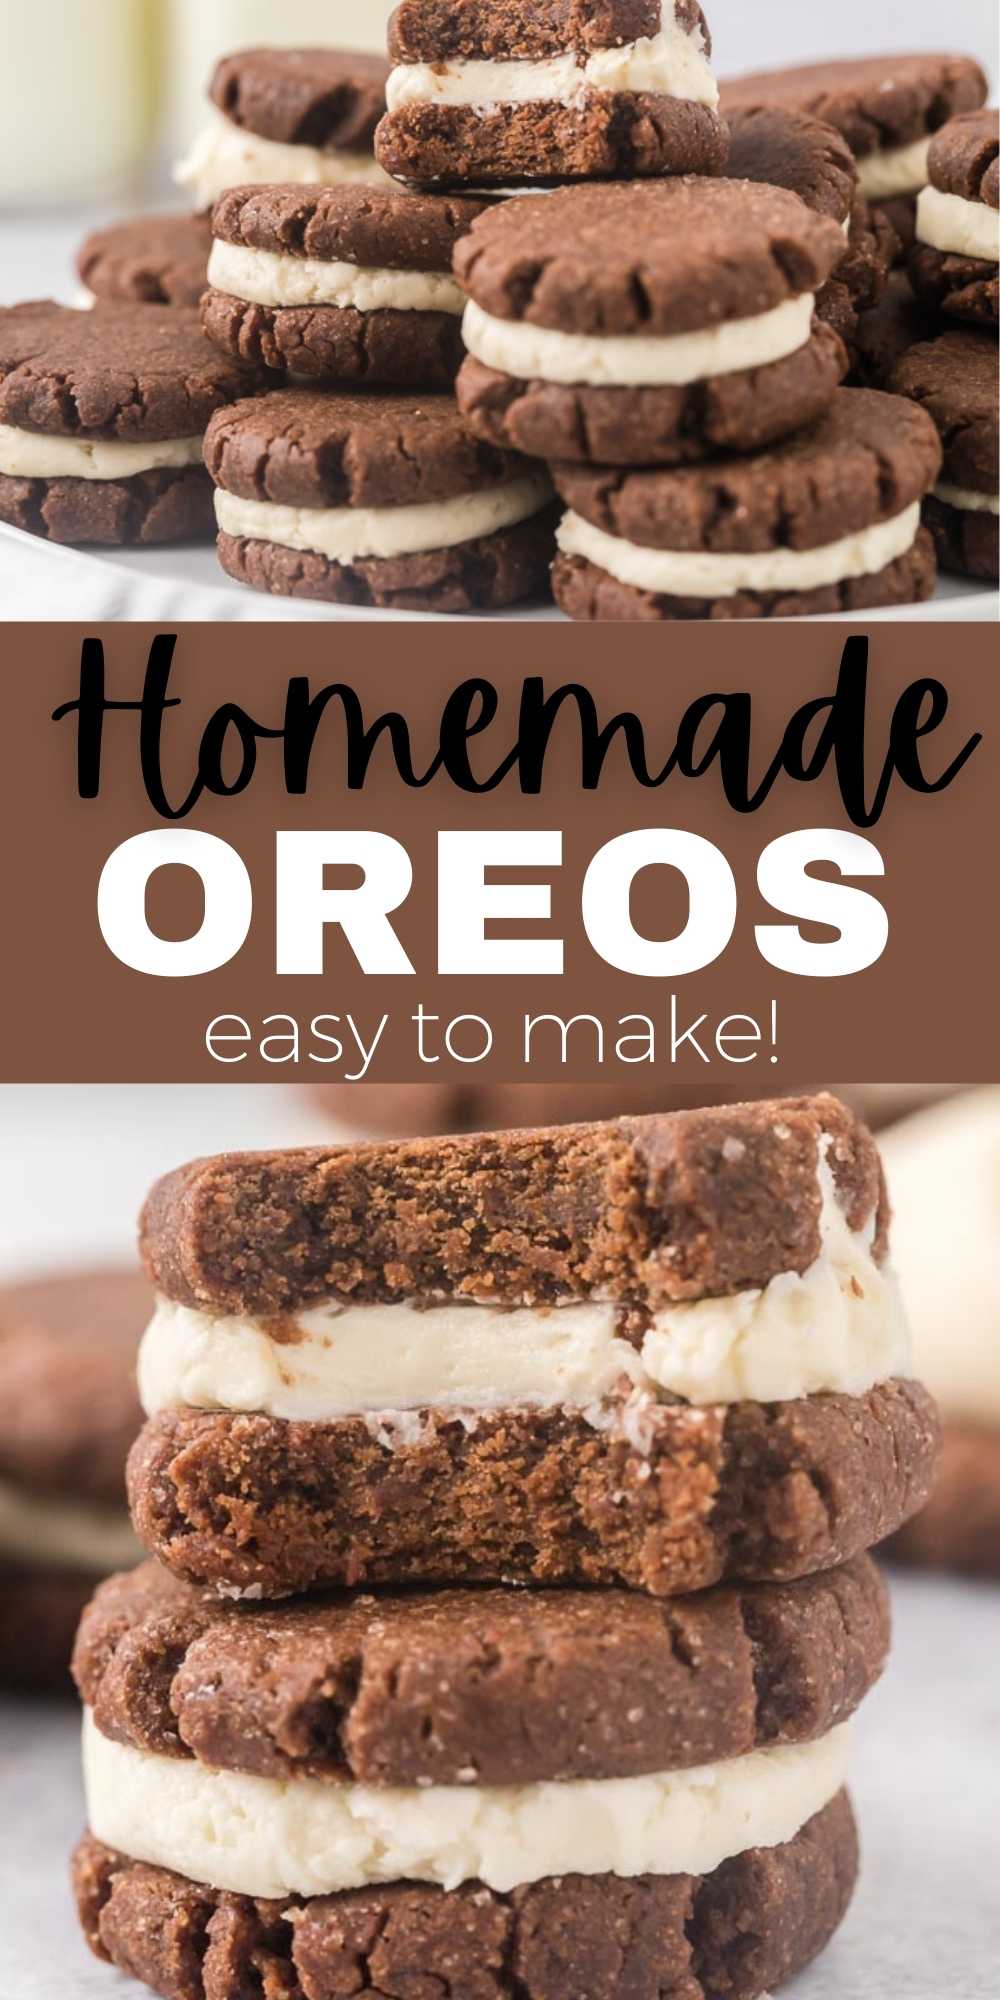 Try this easy Homemade Oreo Cookies recipe for anyone who loves Oreos. These Homemade Oreos taste even better than the store bought ones.  These chocolate cookies filled with cream filling tastes amazing and are simple to make too!  #eatingonadime #cookierecipes #oreorecipes 
